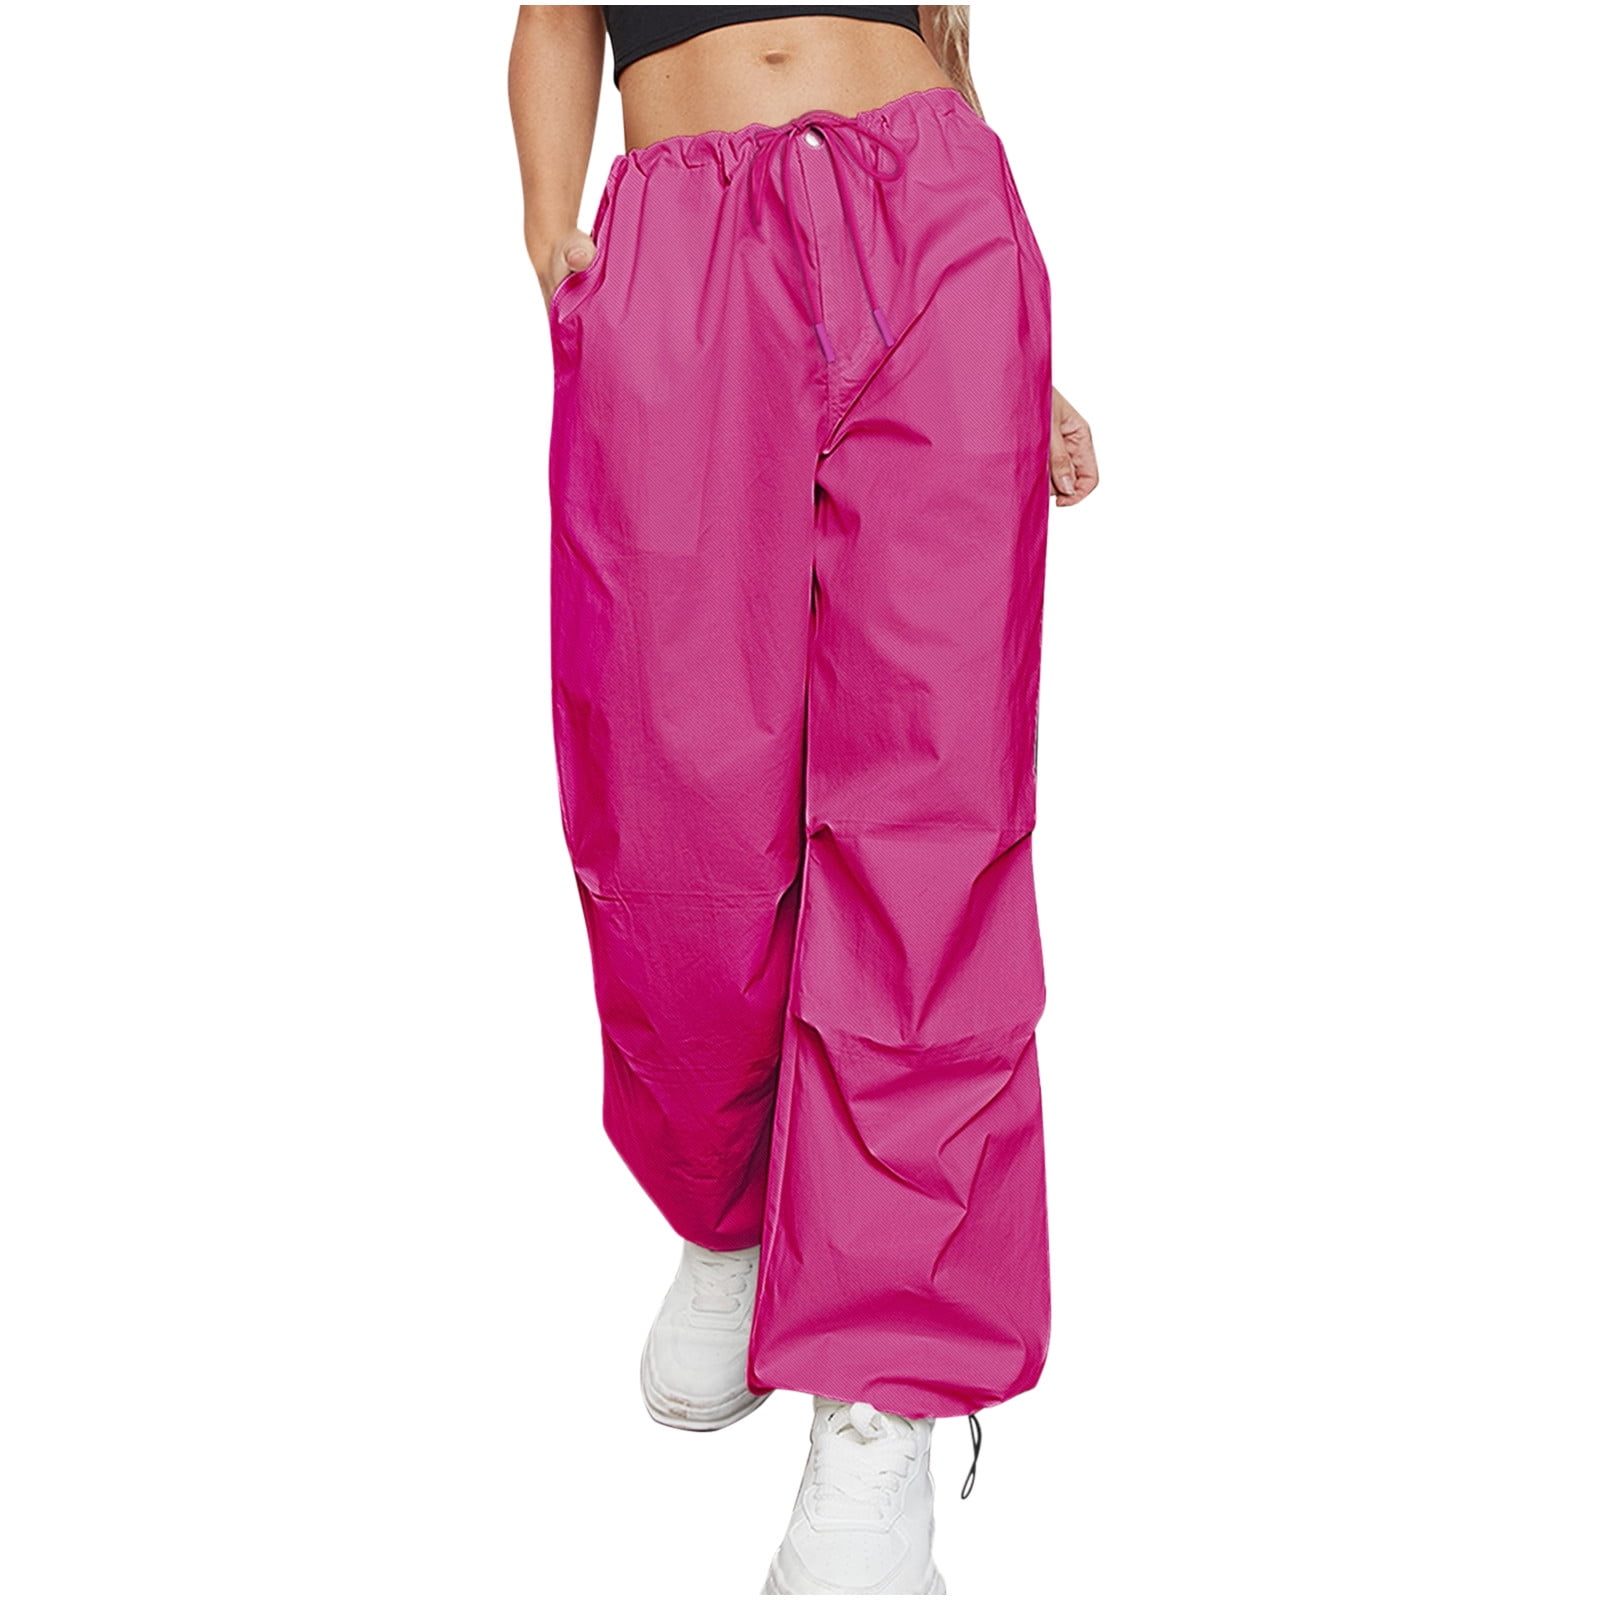 Fashion (pink)Y2K Clothing Oversized Drawstring Low Waist Parachute Loose  Fit Sweatpants Trousers Women Jogger Cargo Pants Streetwear Outfits DOU @  Best Price Online